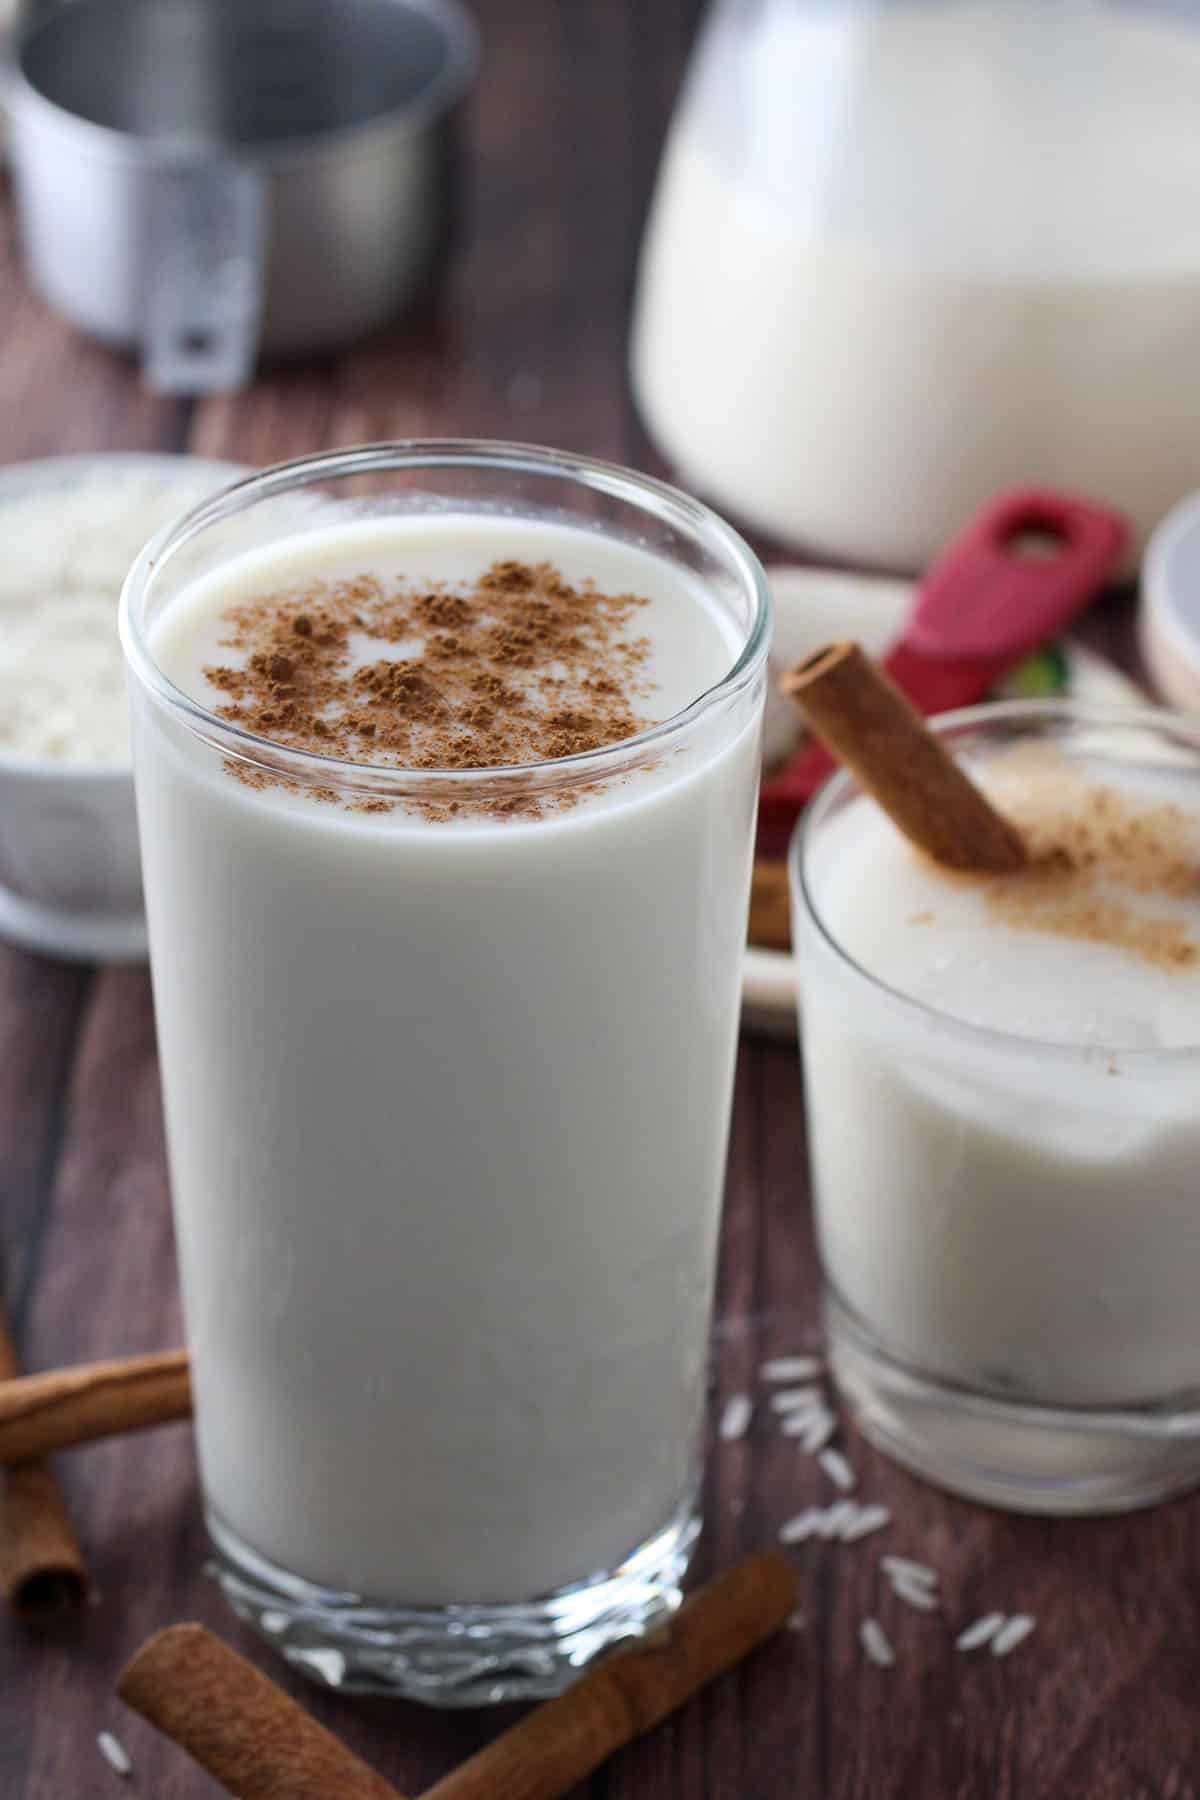 Horchata in glasses with sprinkling of cinnamon powder